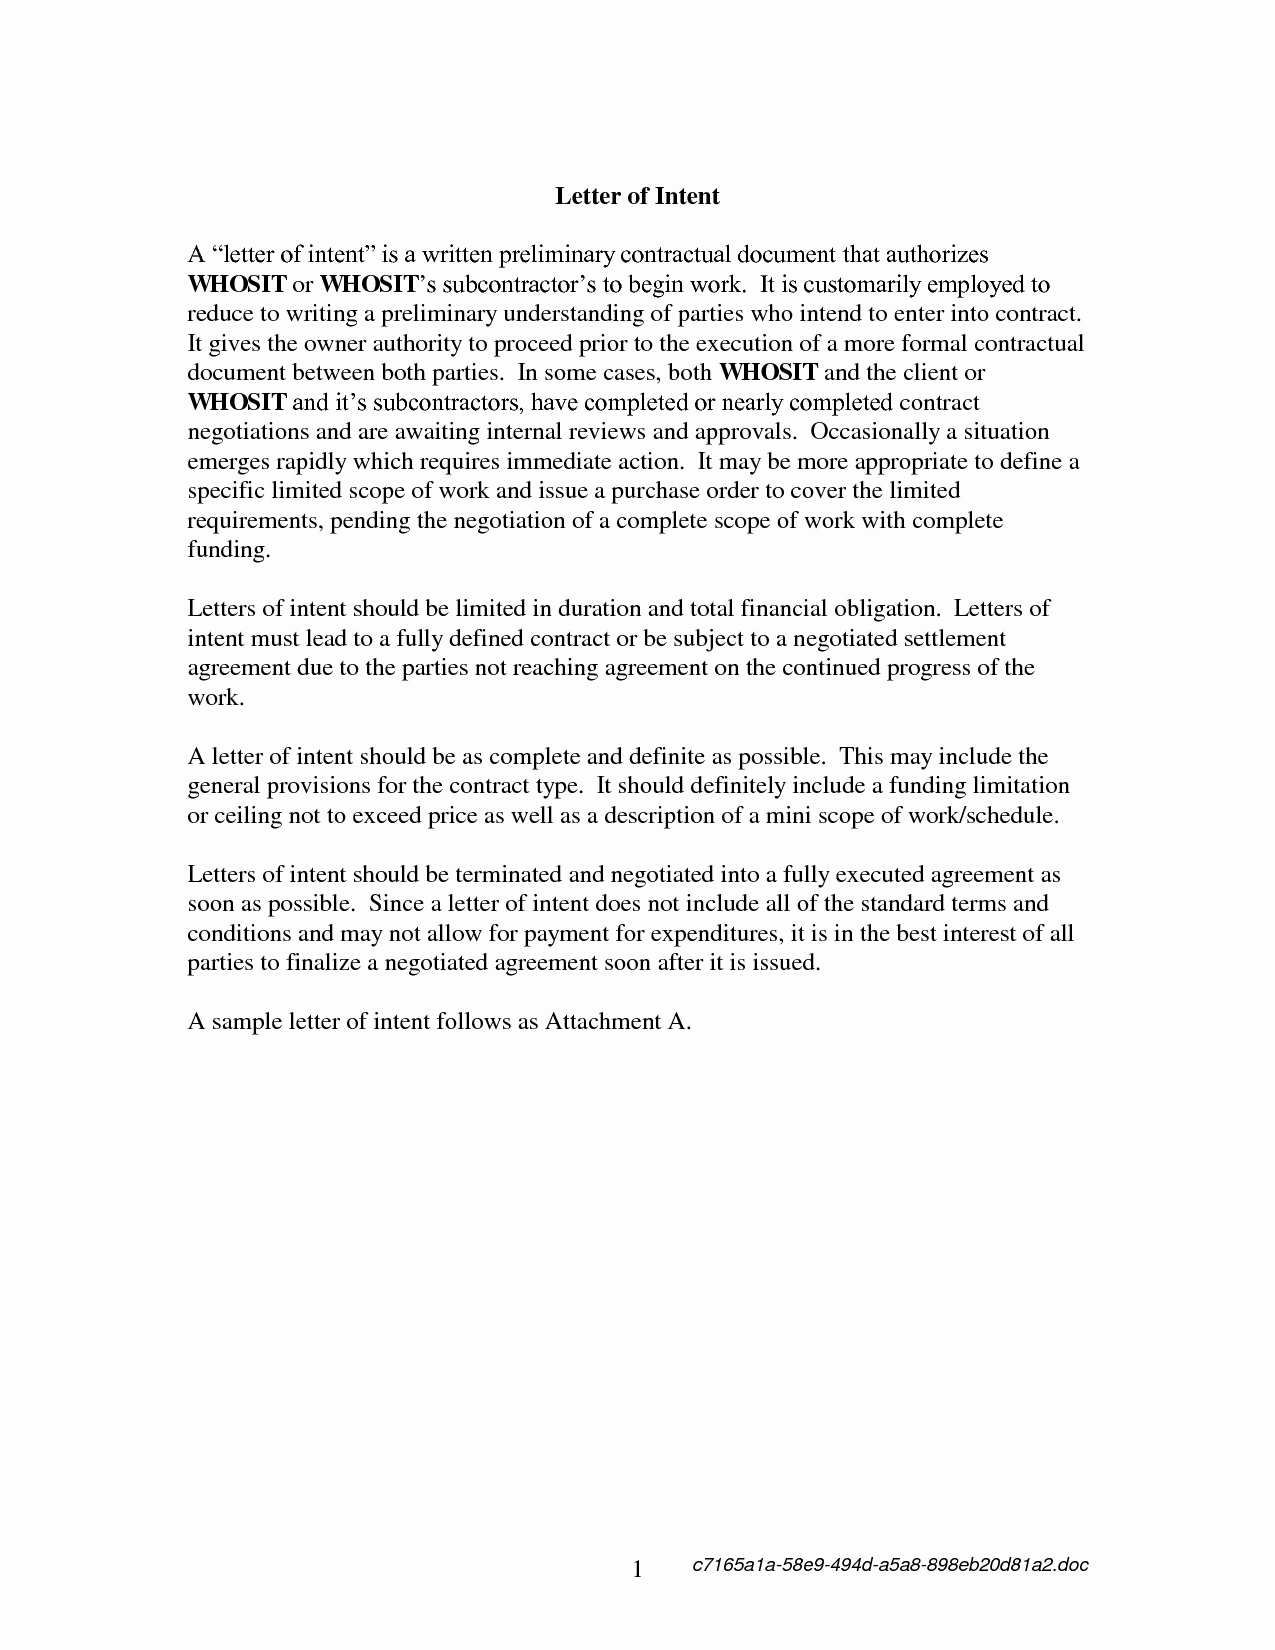 Best S Of Resume with Letter Intent Job